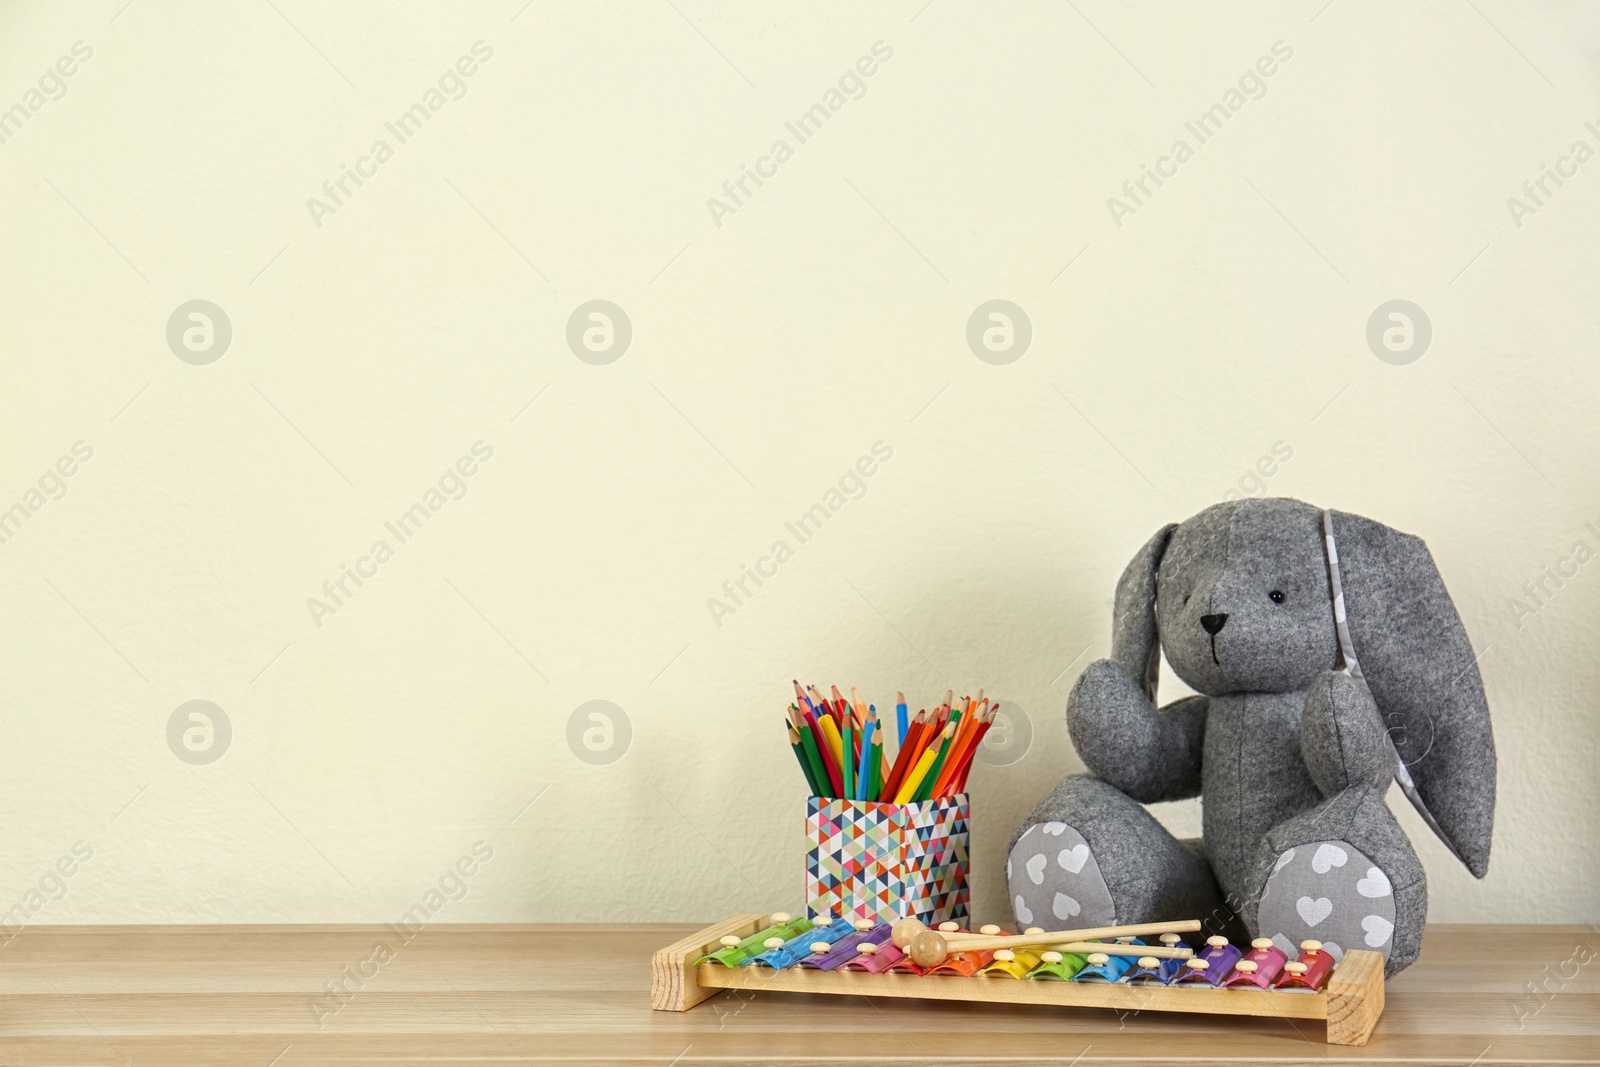 Photo of Toys and holder with color pencils for baby room interior on wooden table near light wall